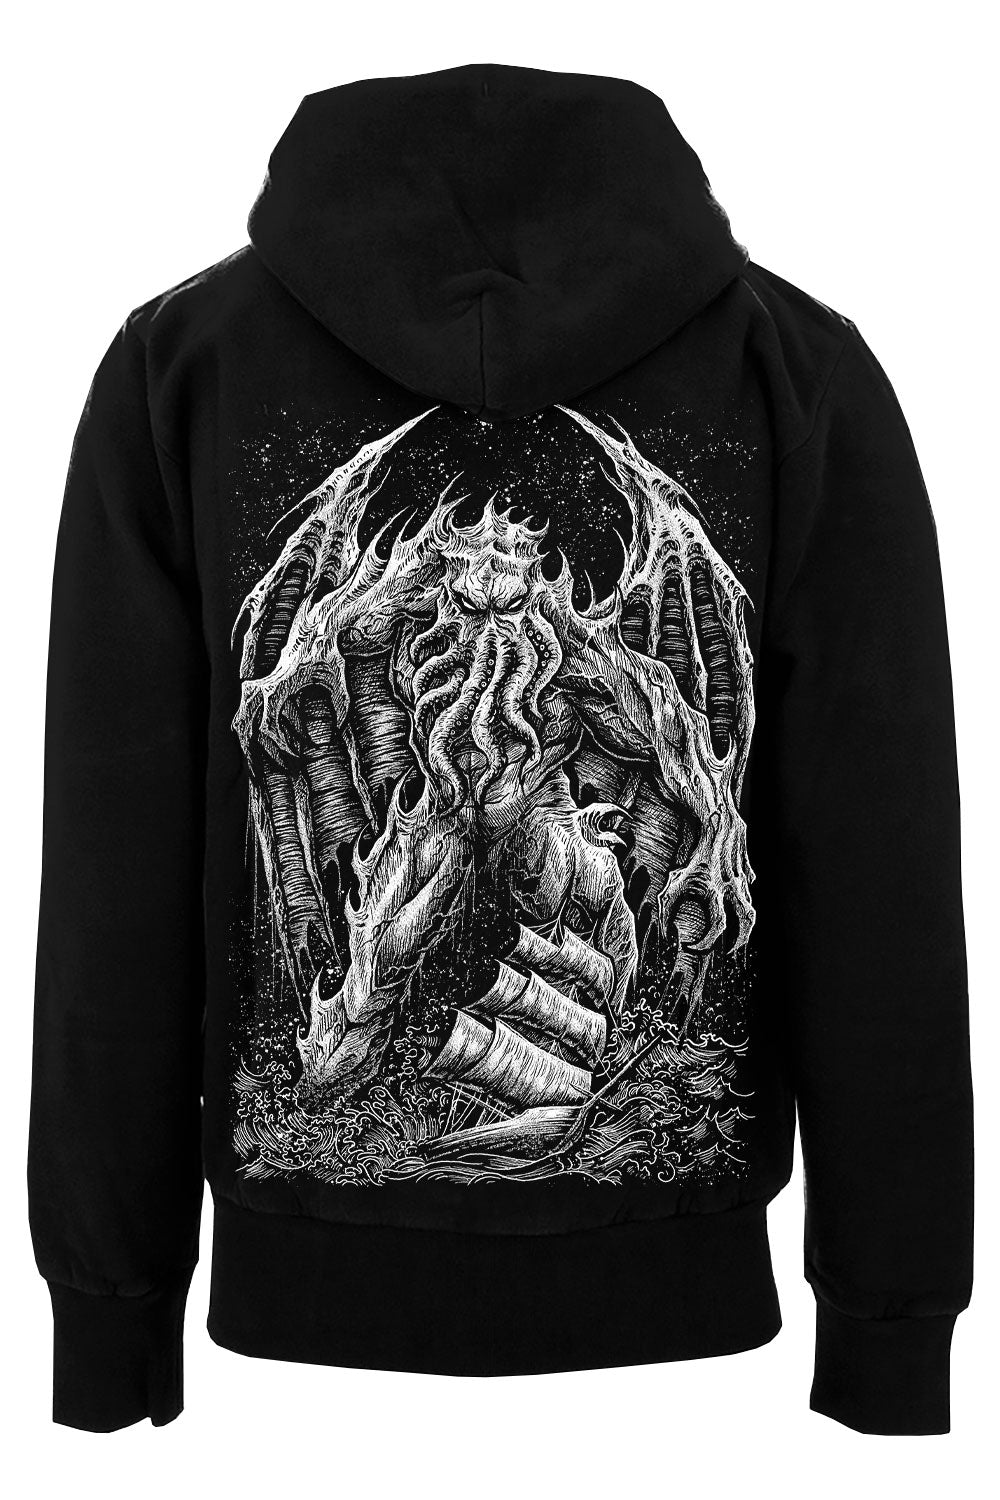 mens plus size gothic Cthulhu hoodie